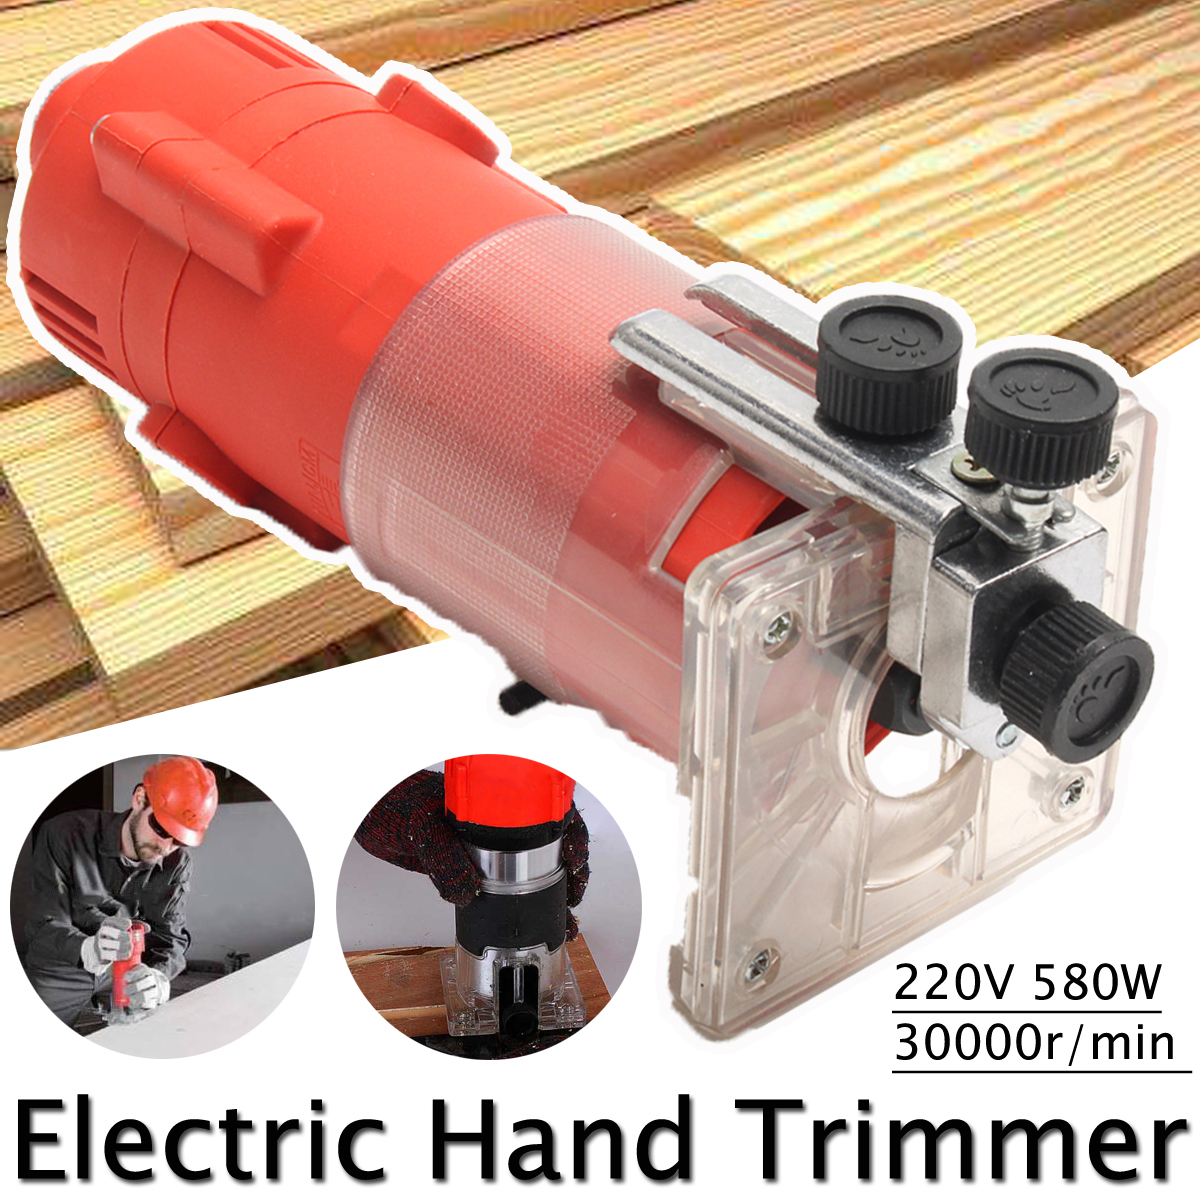 Raitooltrade-220V-580W-635mm-Electric-Hand-Trimmer-Wood-Laminator-Router-Tools-30000rmin-1263028-1